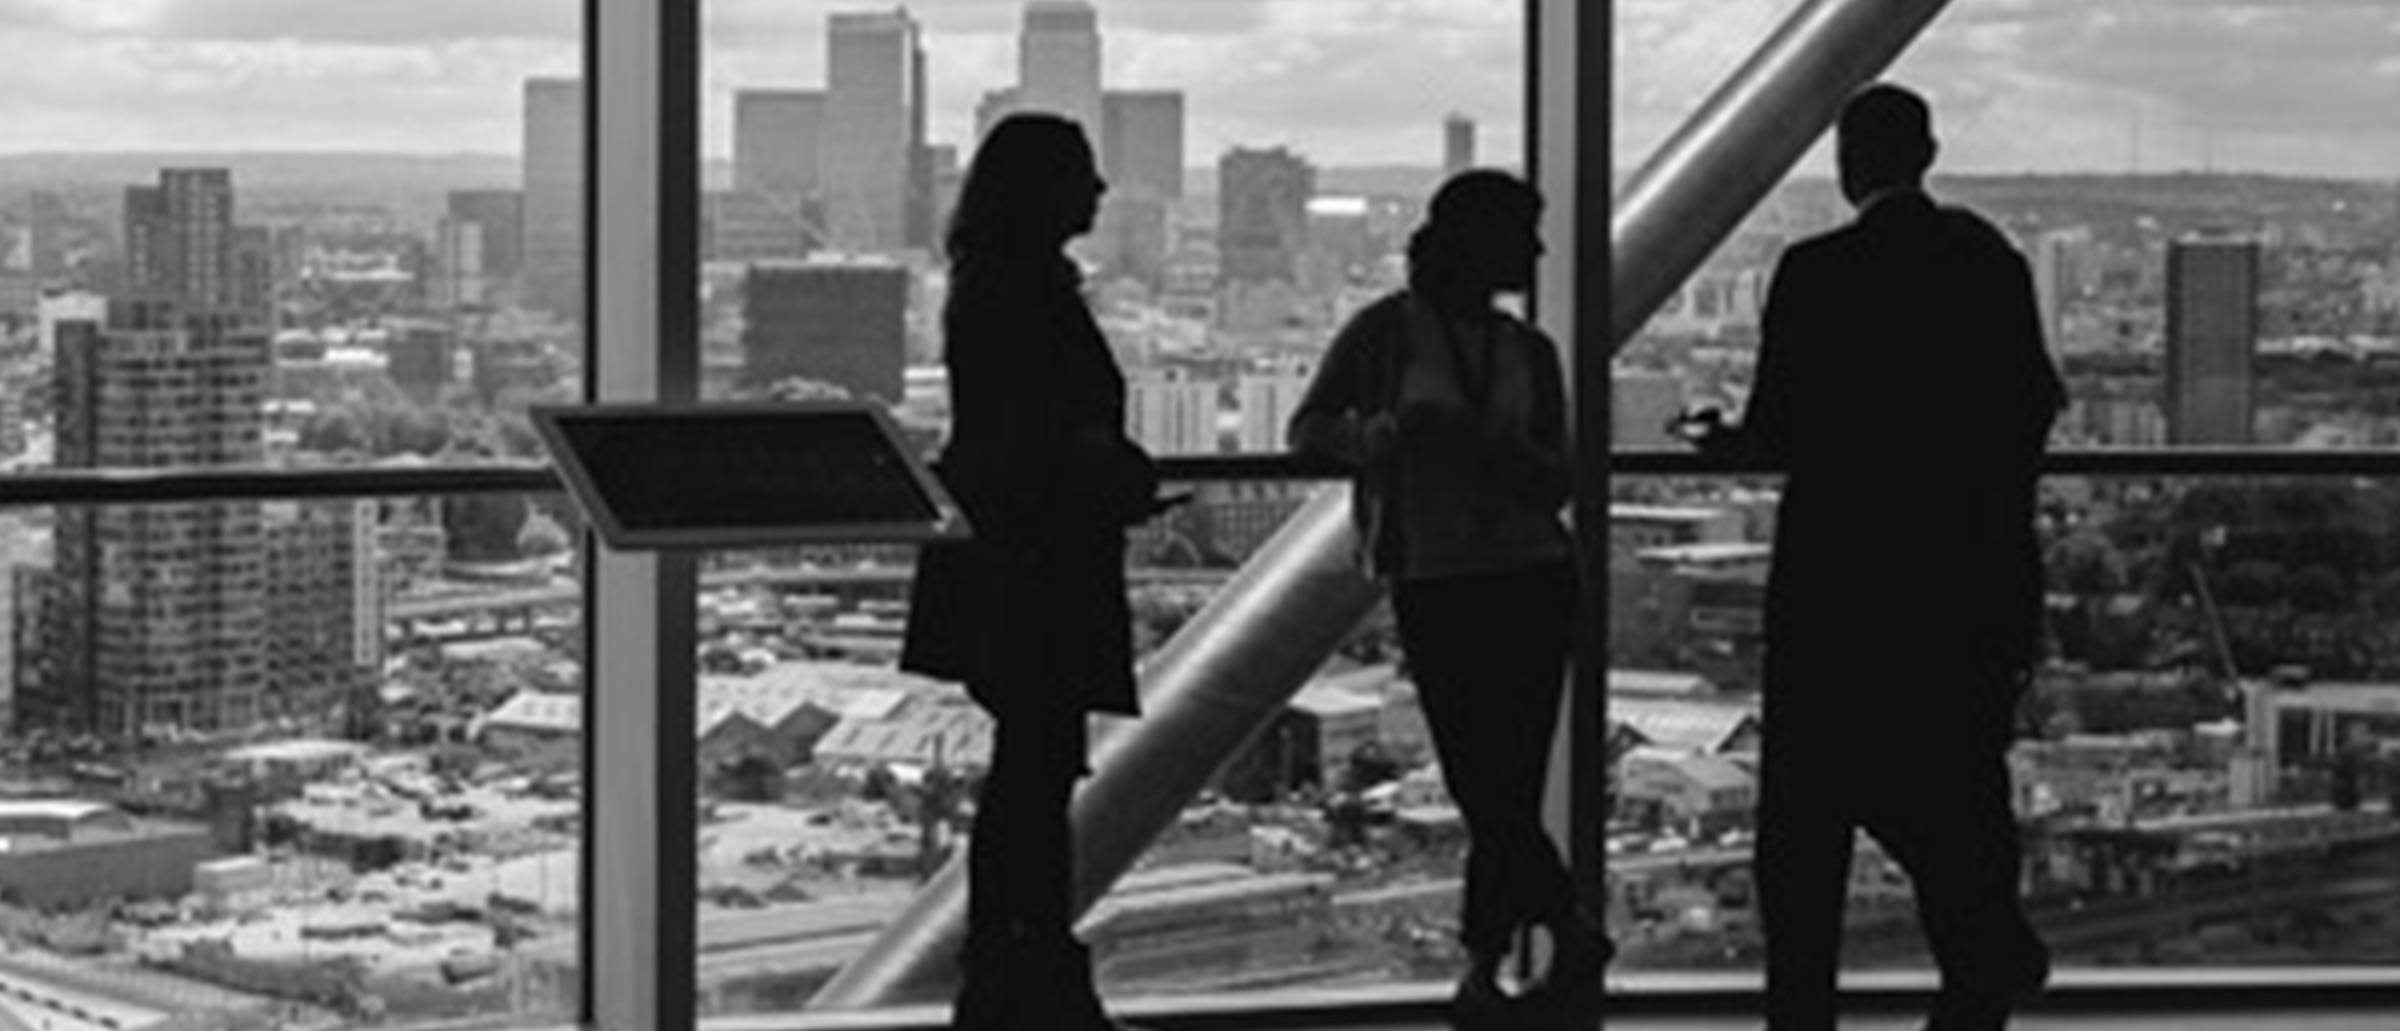 Silhouette business professionals conversing in front of a big glass window overlooking a city